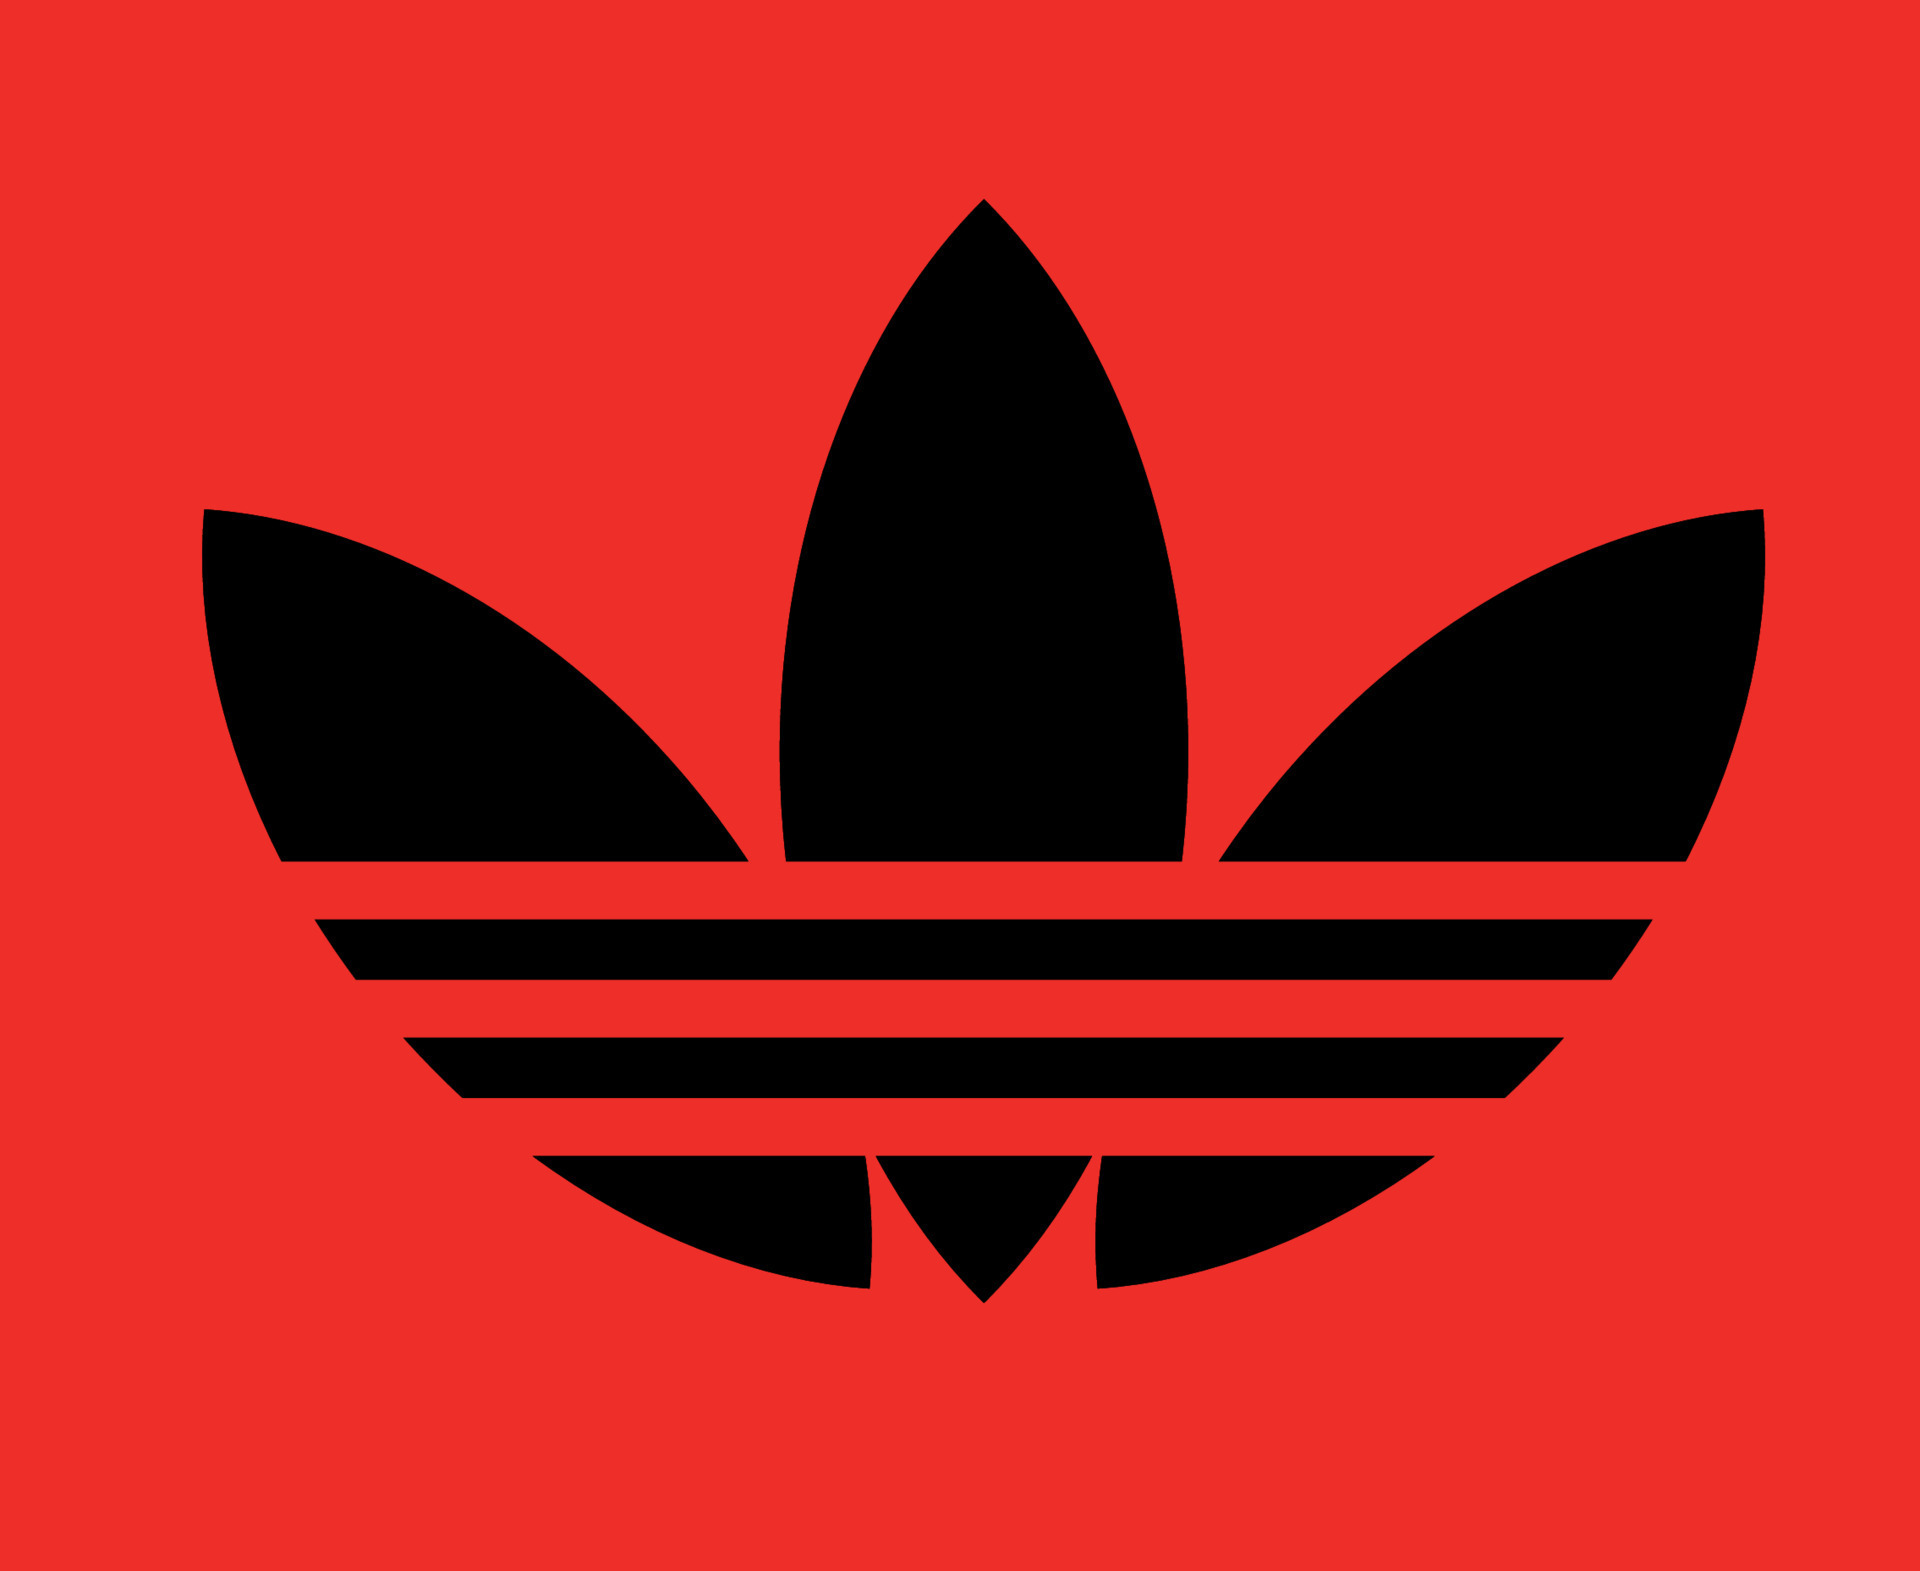 Adidas Symbol Logo Clothes Design Icon Abstract Illustration With Red Background 10994475 Vector Art Vecteezy